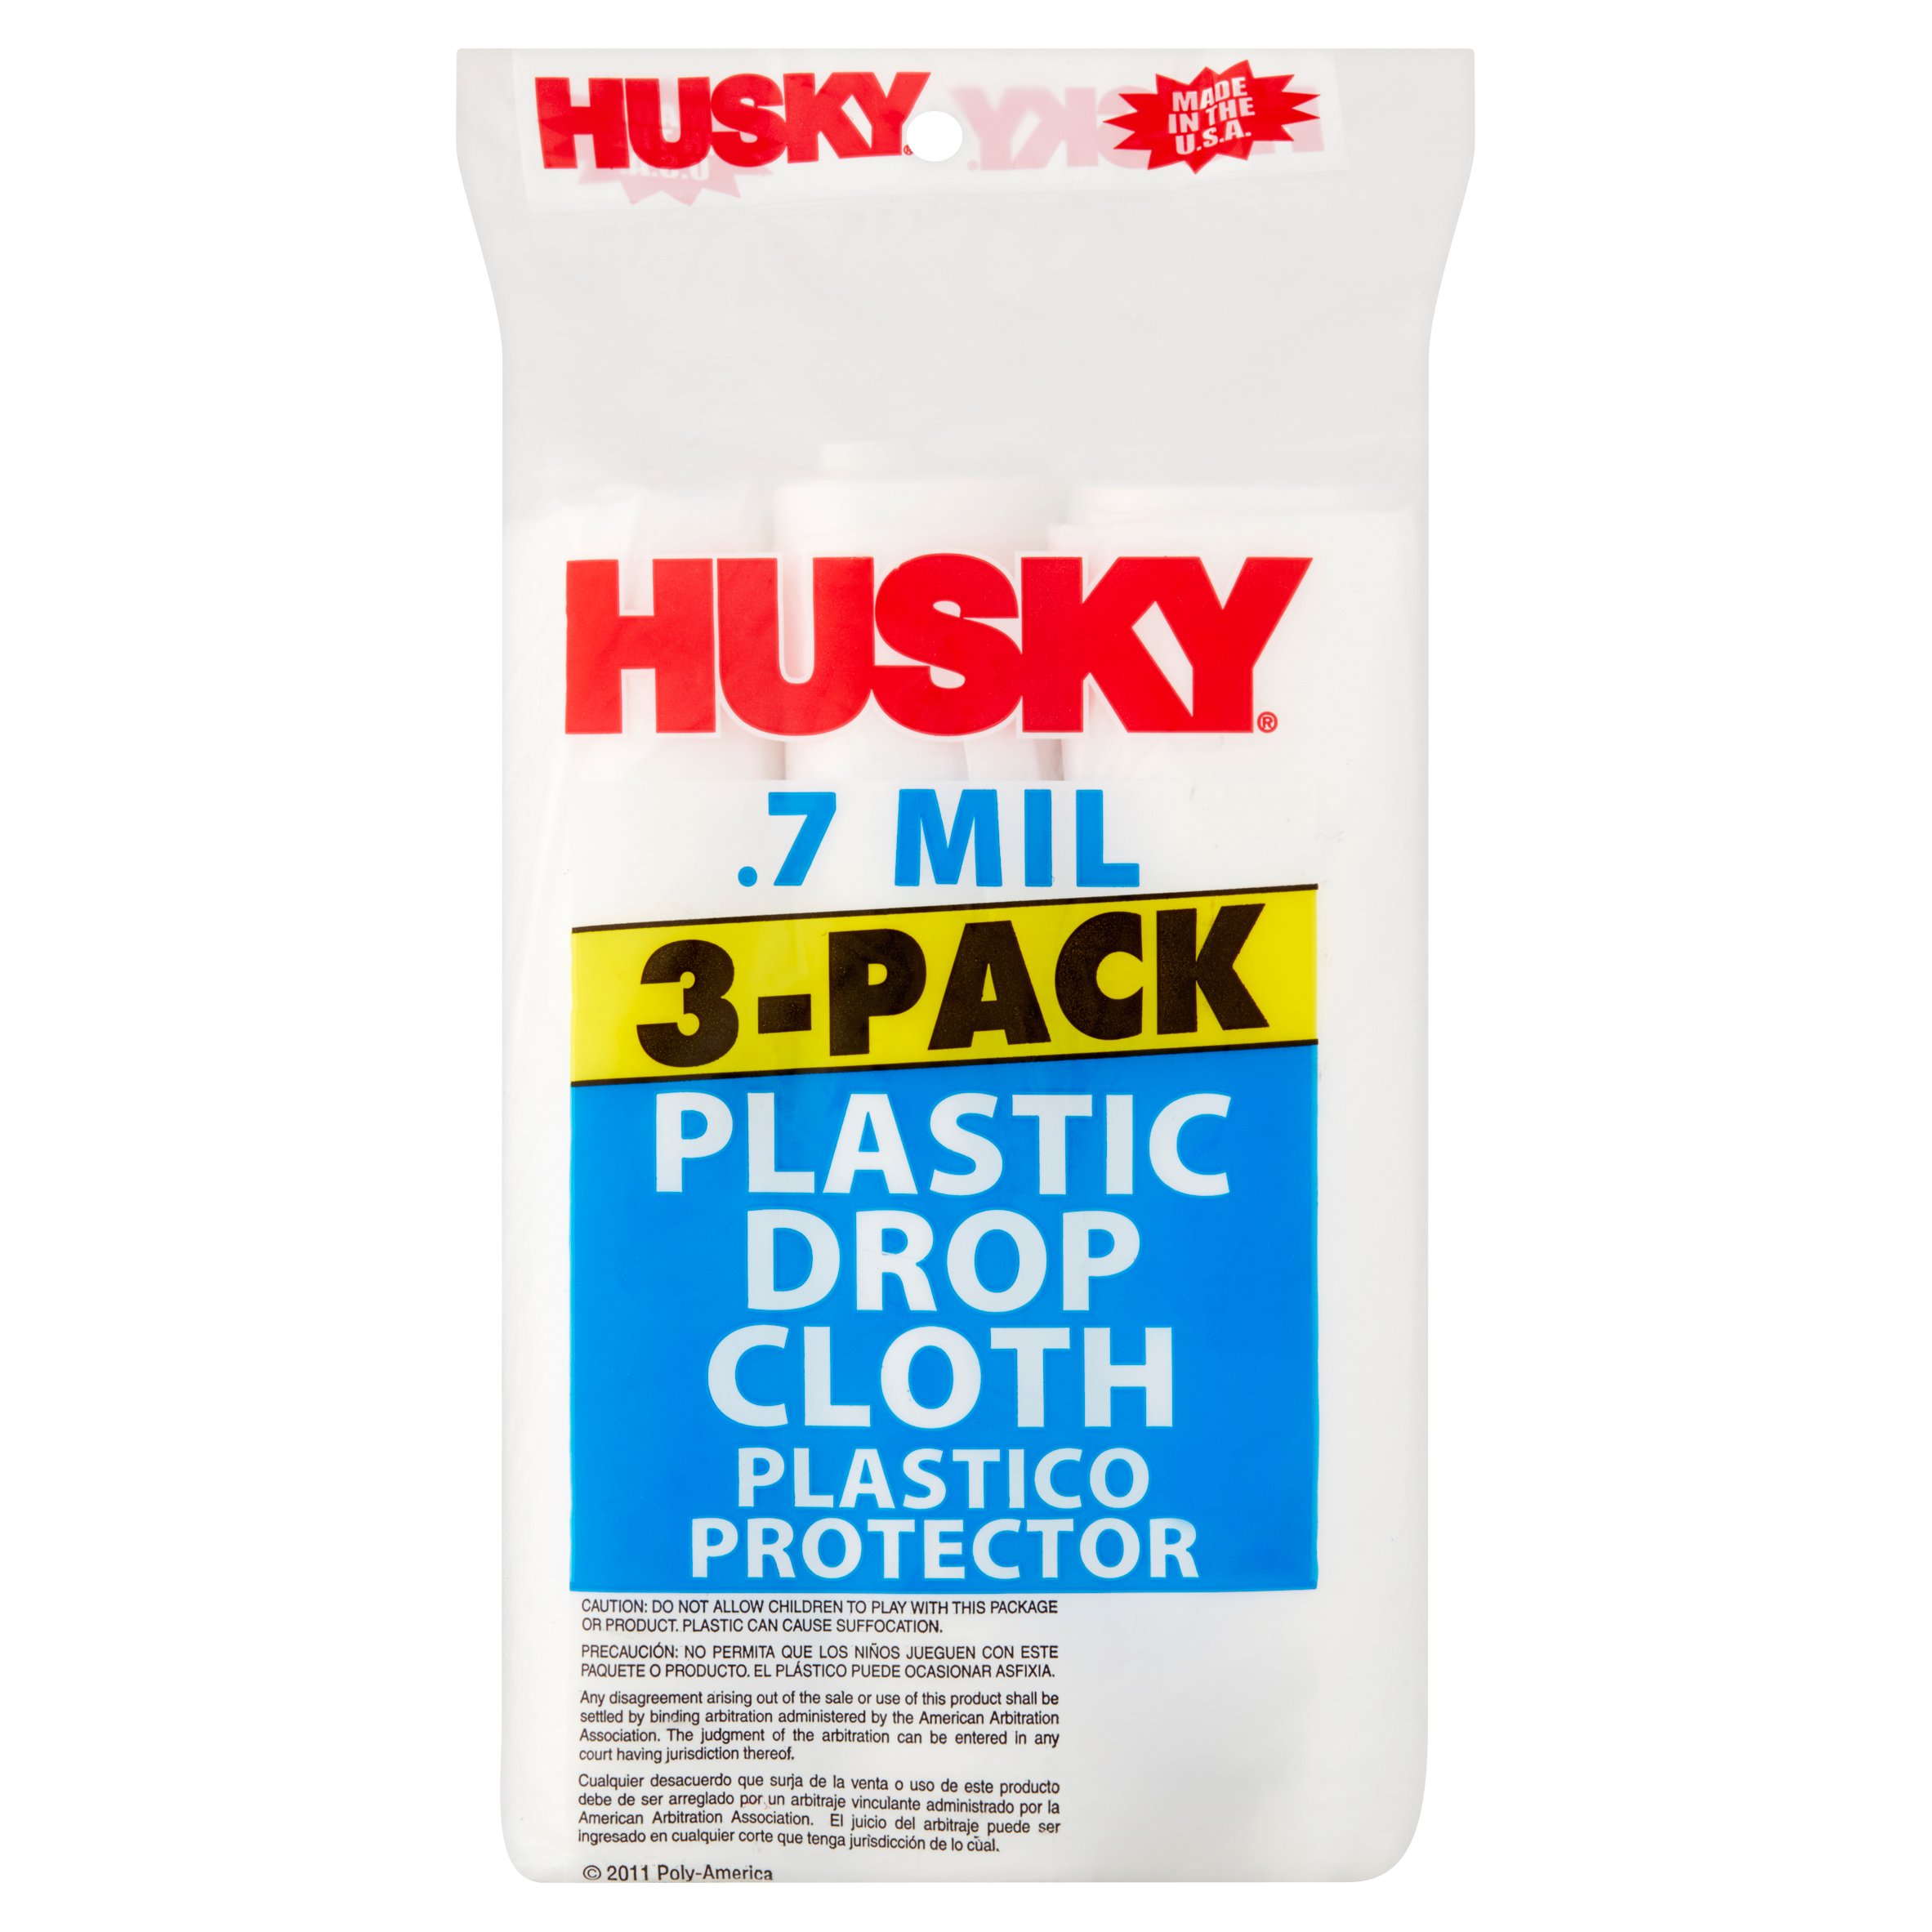 Husky Clear Plastic Drop Cloth, 0.7 Mil, 9 Ft x 12 Ft, 3 Pack - image 3 of 9